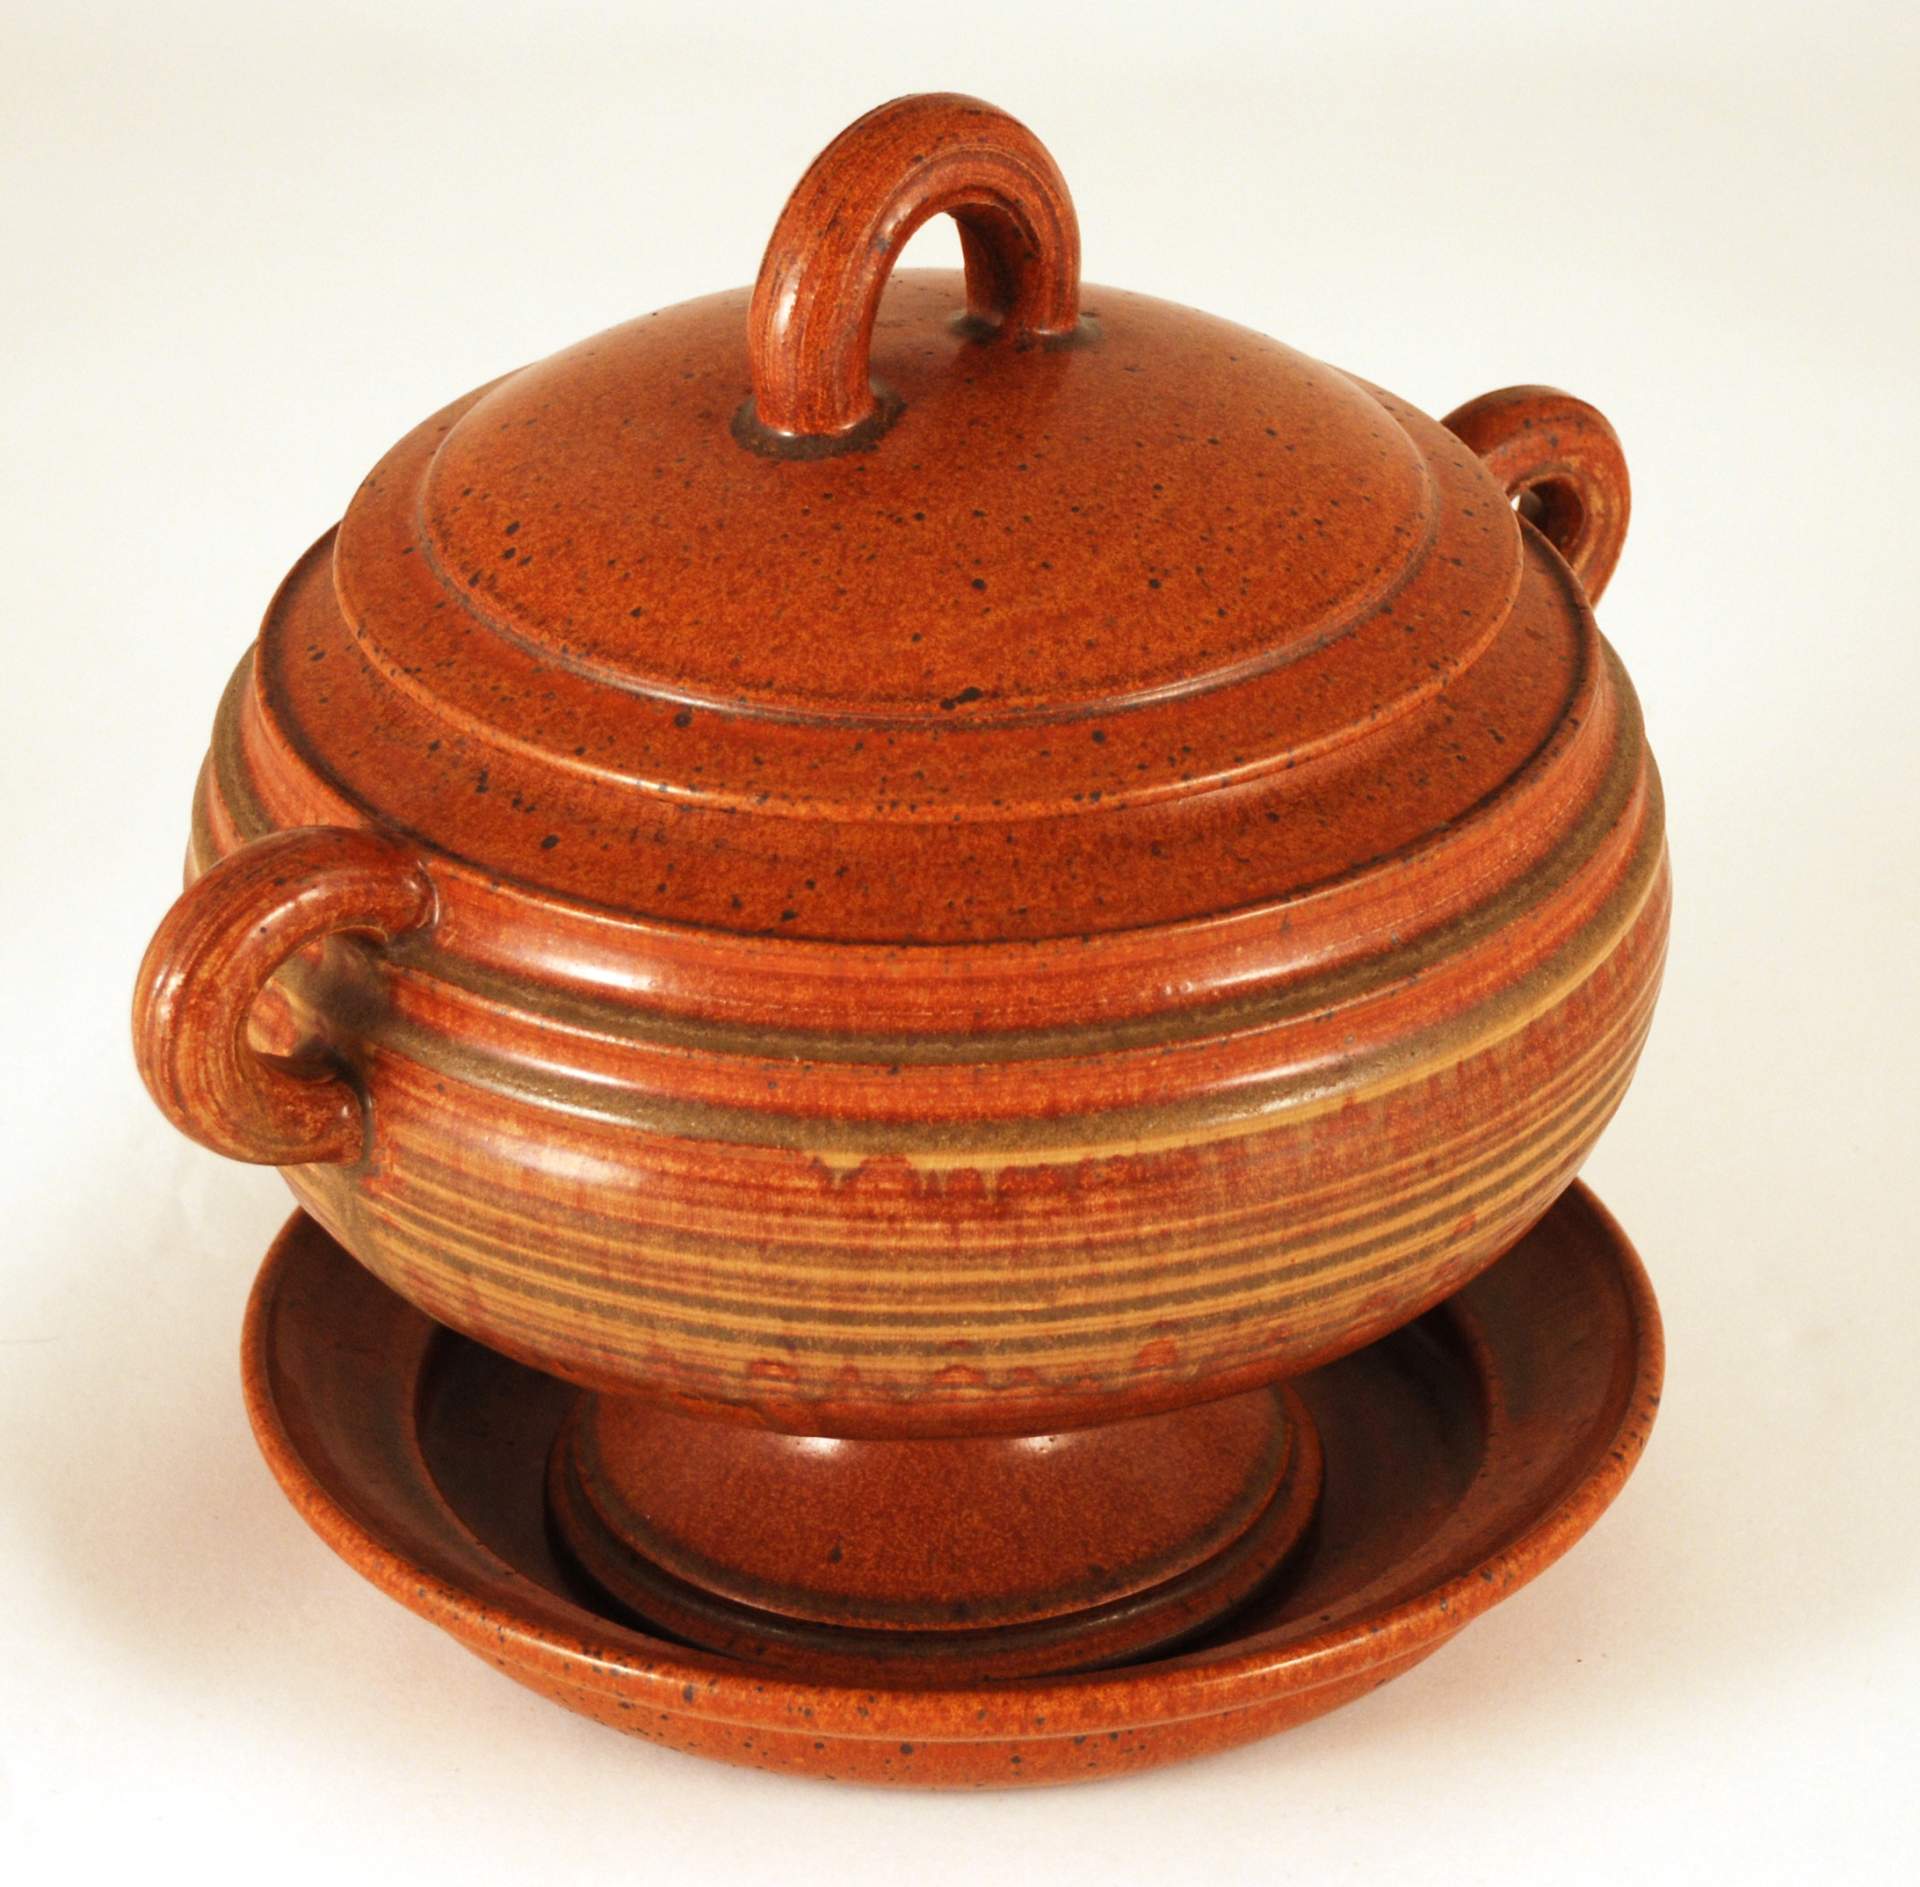 Untitled [Covered Soup Tureen with Saucer]